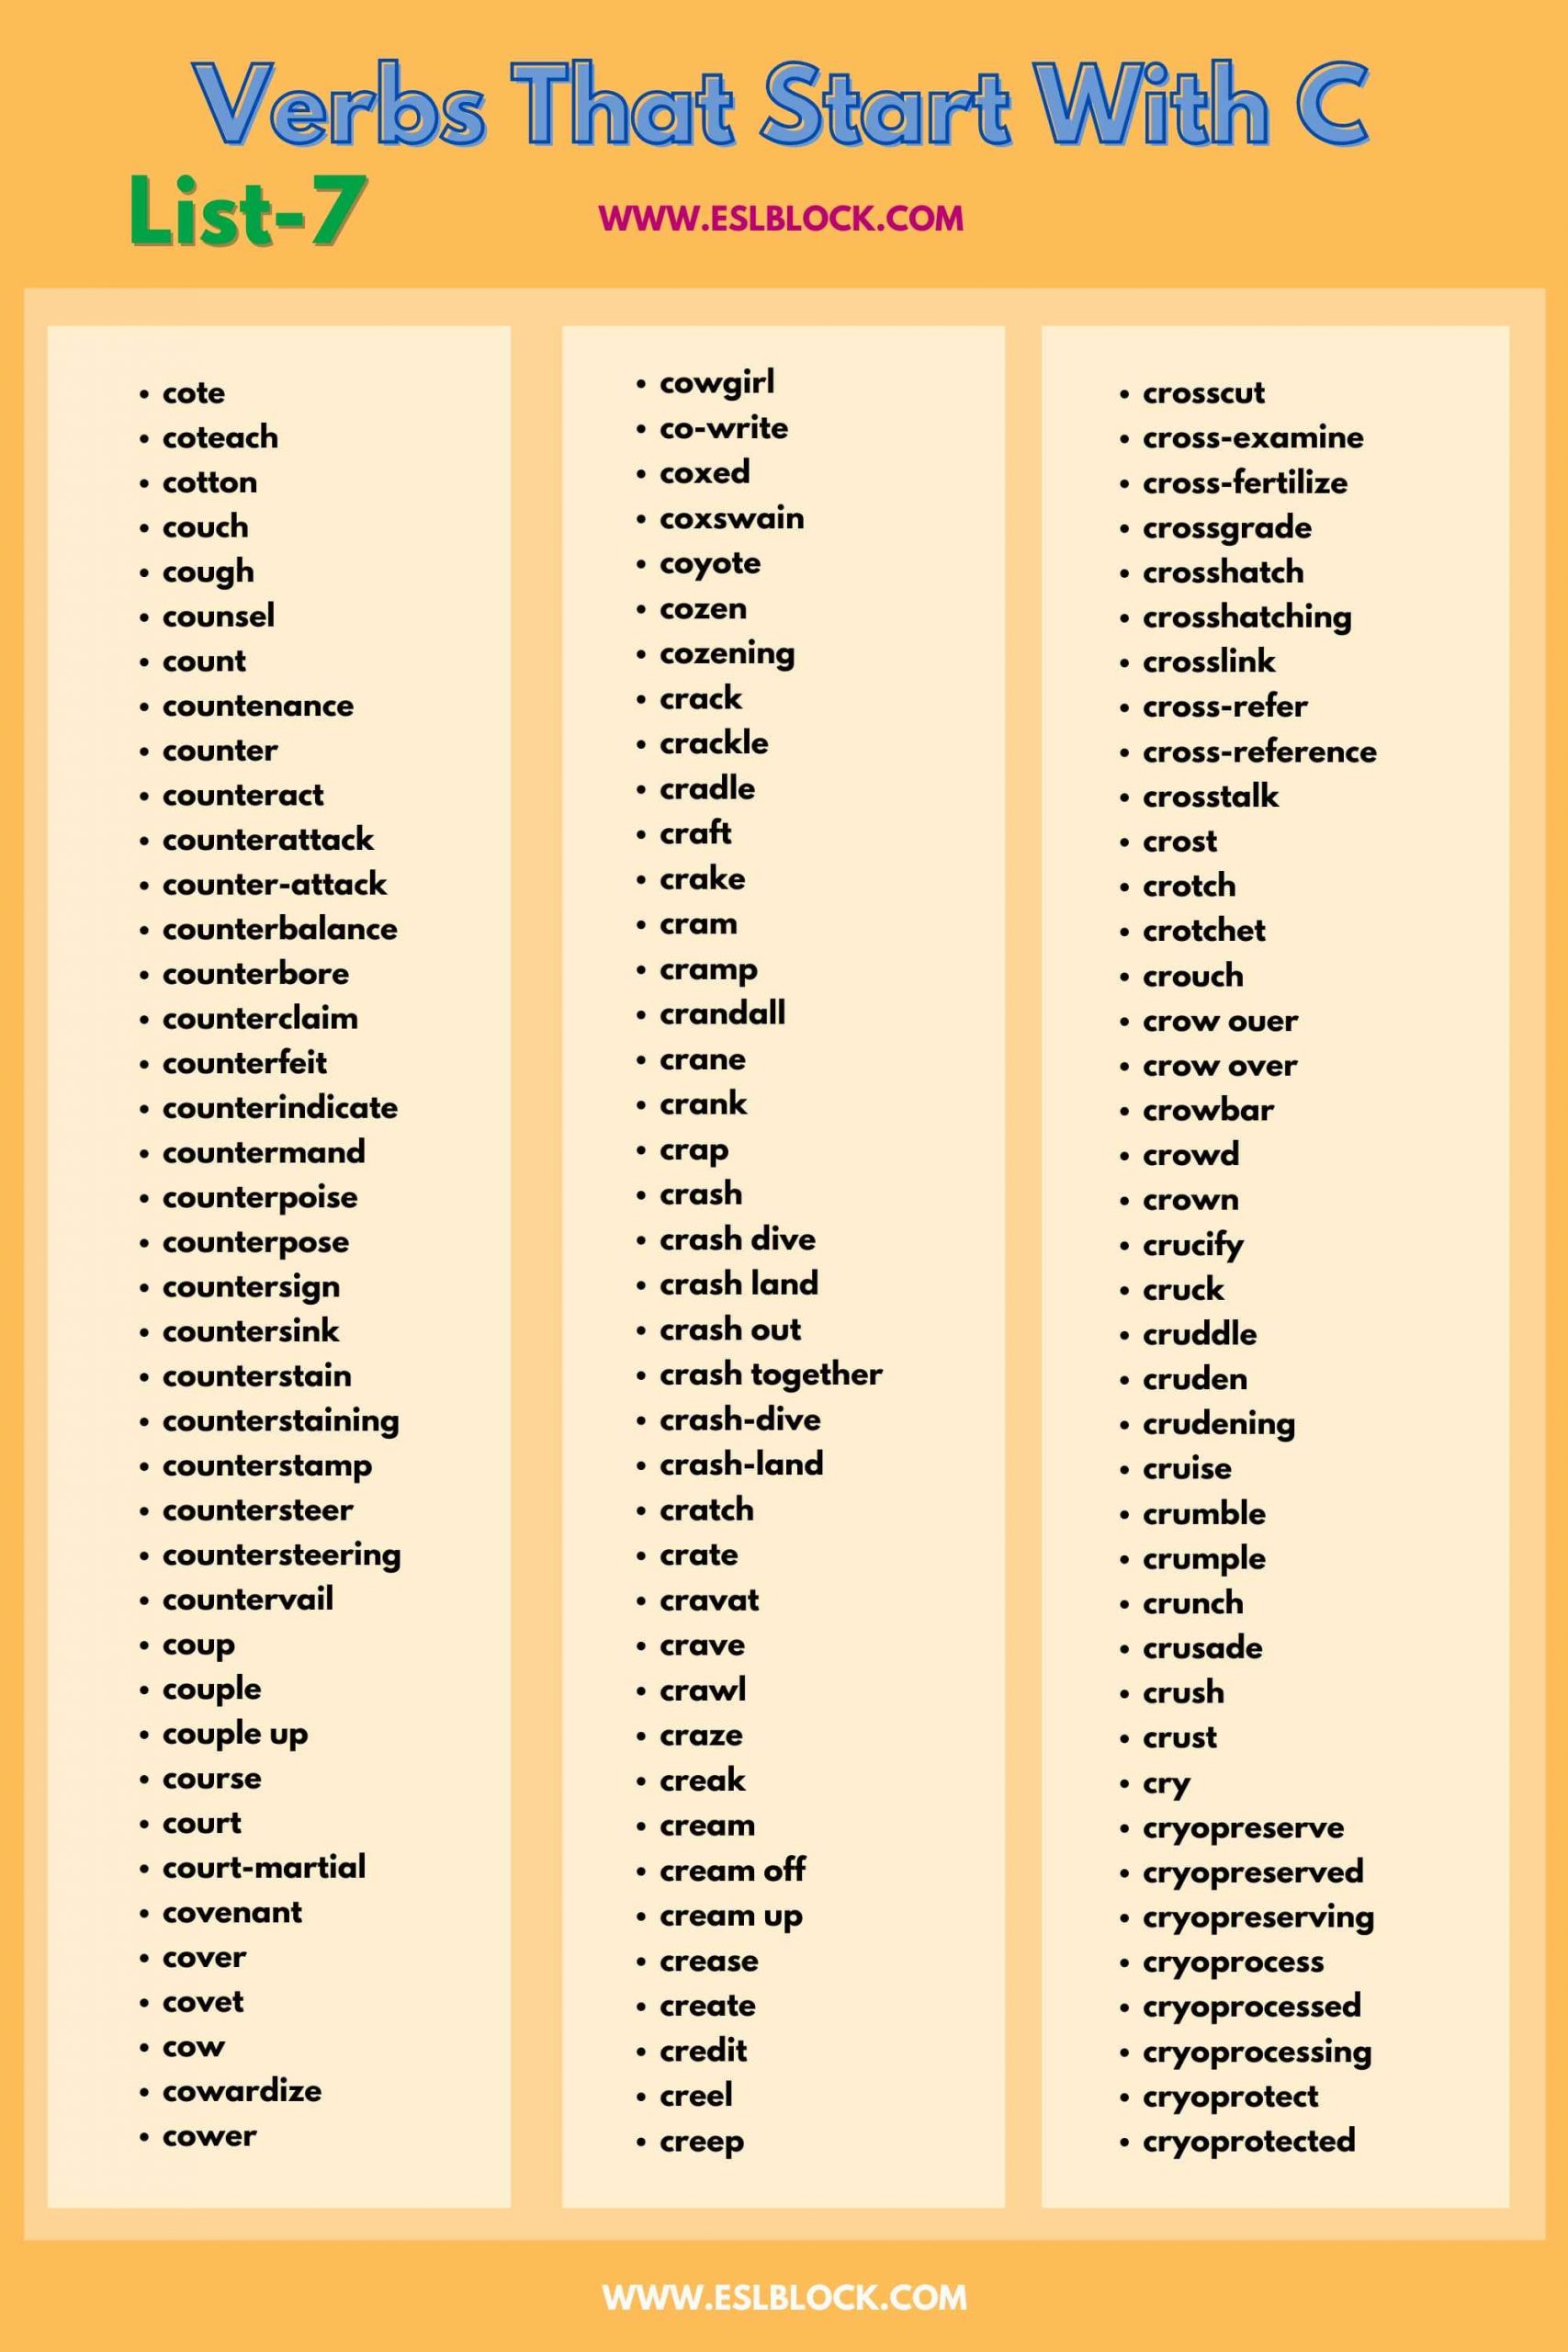 4 Letter Verbs, 5 Letter Verbs Starting With C, Action Words, Action Words That Start With C, C Action Words, C Verbs, C Verbs in English, English, English Grammar, English Vocabulary, English Words, List of Verbs That Start With C, Verbs List, Verbs That Start With C, Vocabulary, Words That Start With C